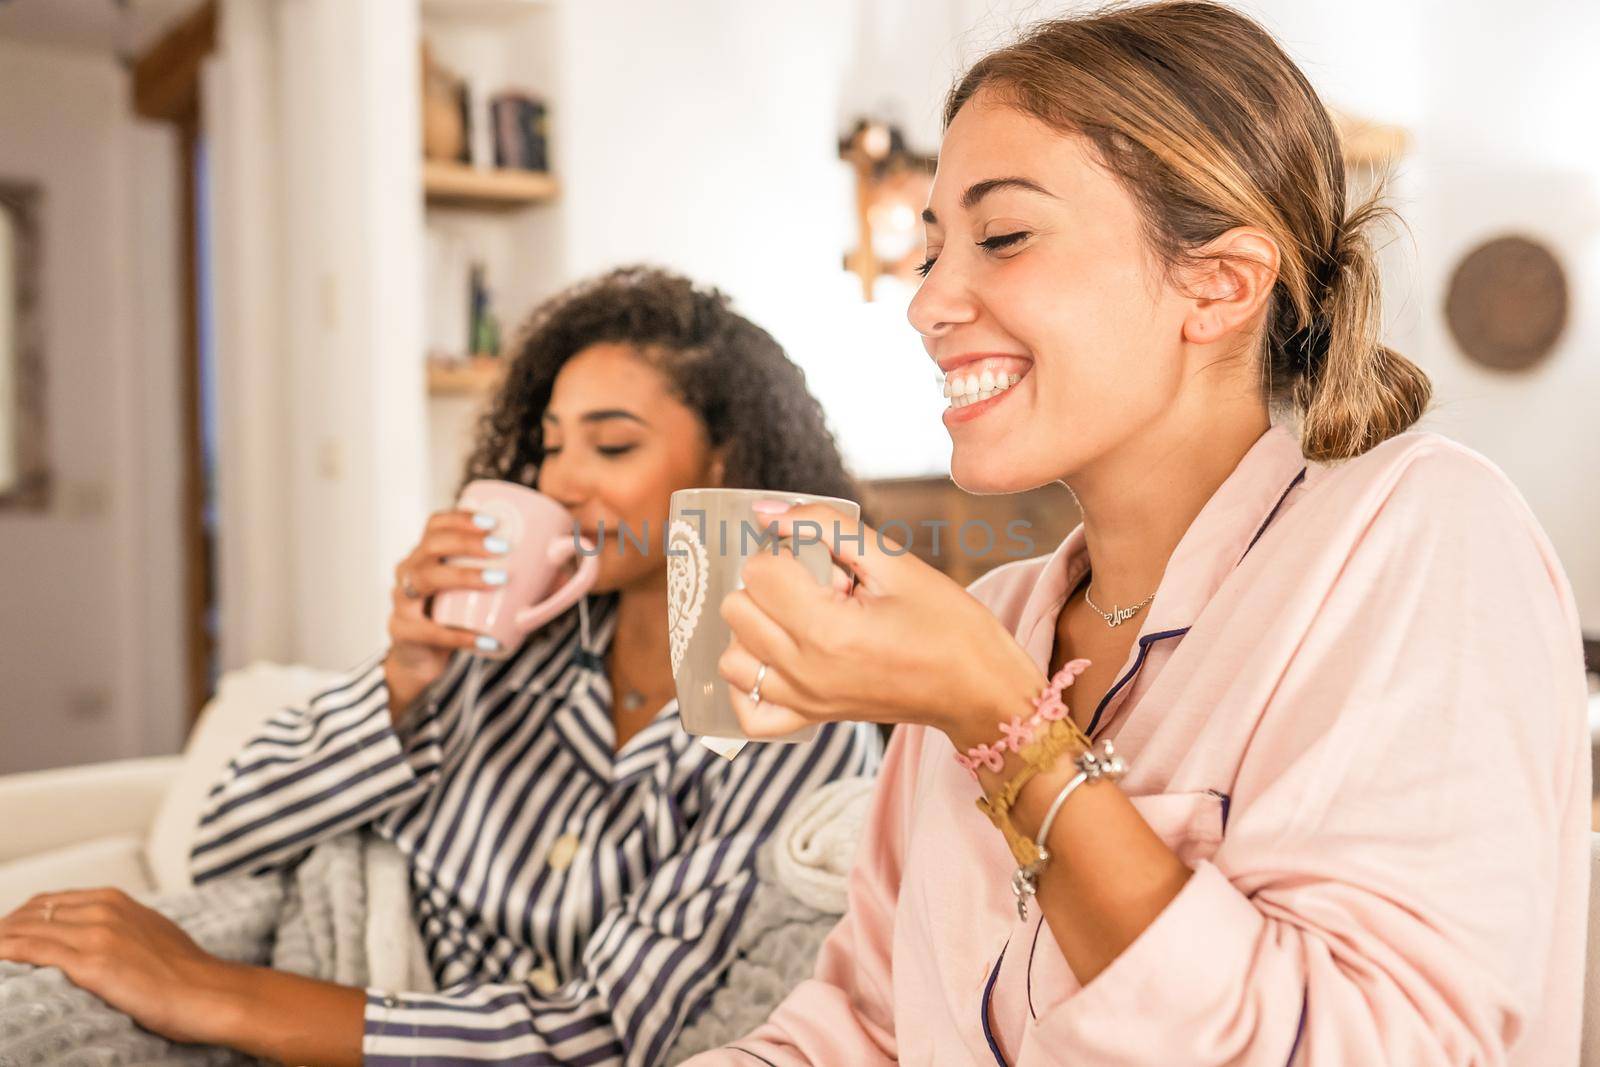 Couple of cohabiting girls in pajamas relaxing under blanket on cozy sofa drink a cup of tea while having fun talking and joking with each other. Real life moments of diverse multiracial gay couple by robbyfontanesi